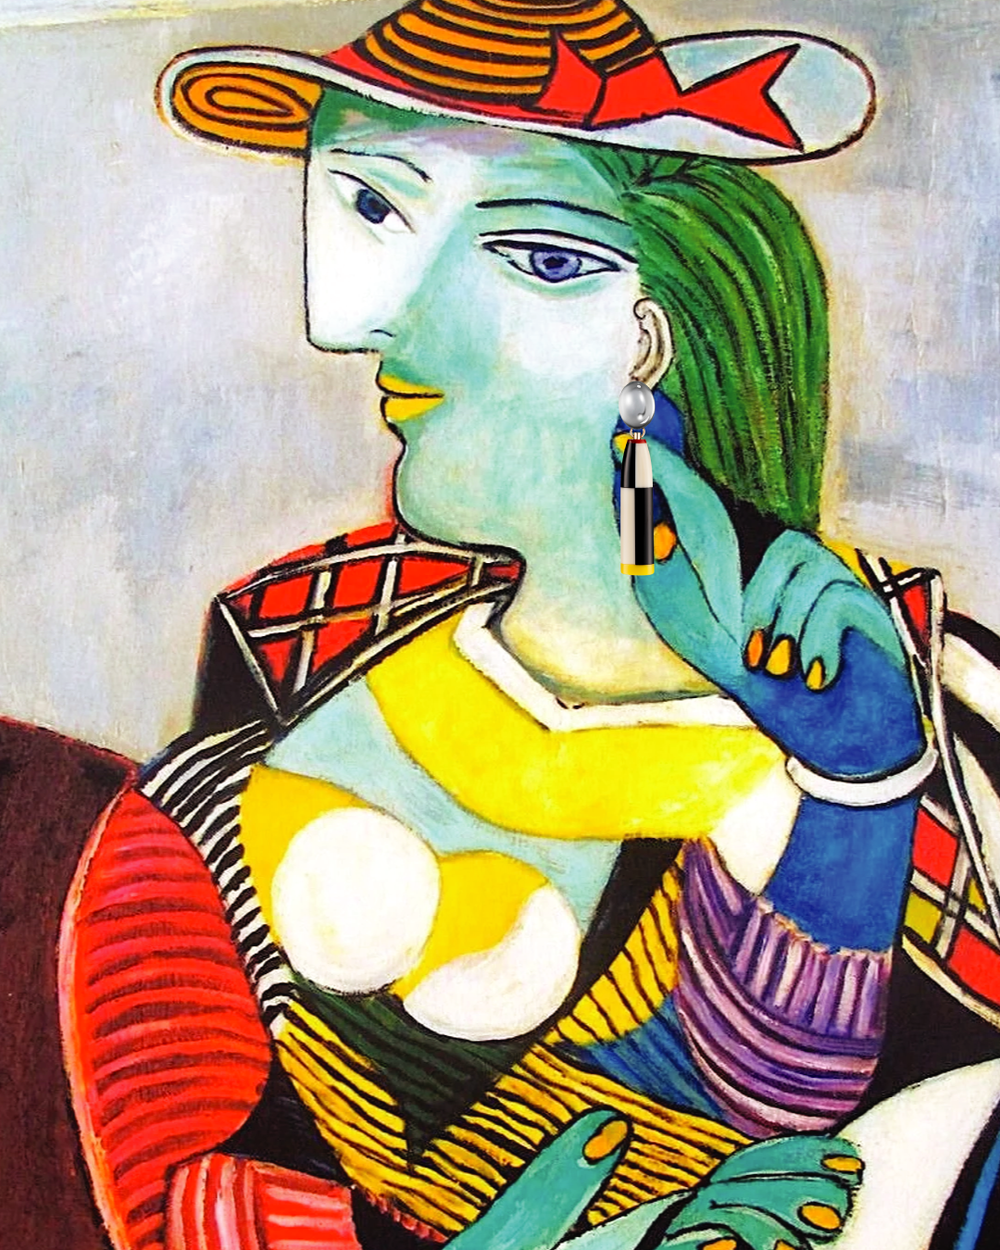 Art-time-travelling-with-picasso-1937.png